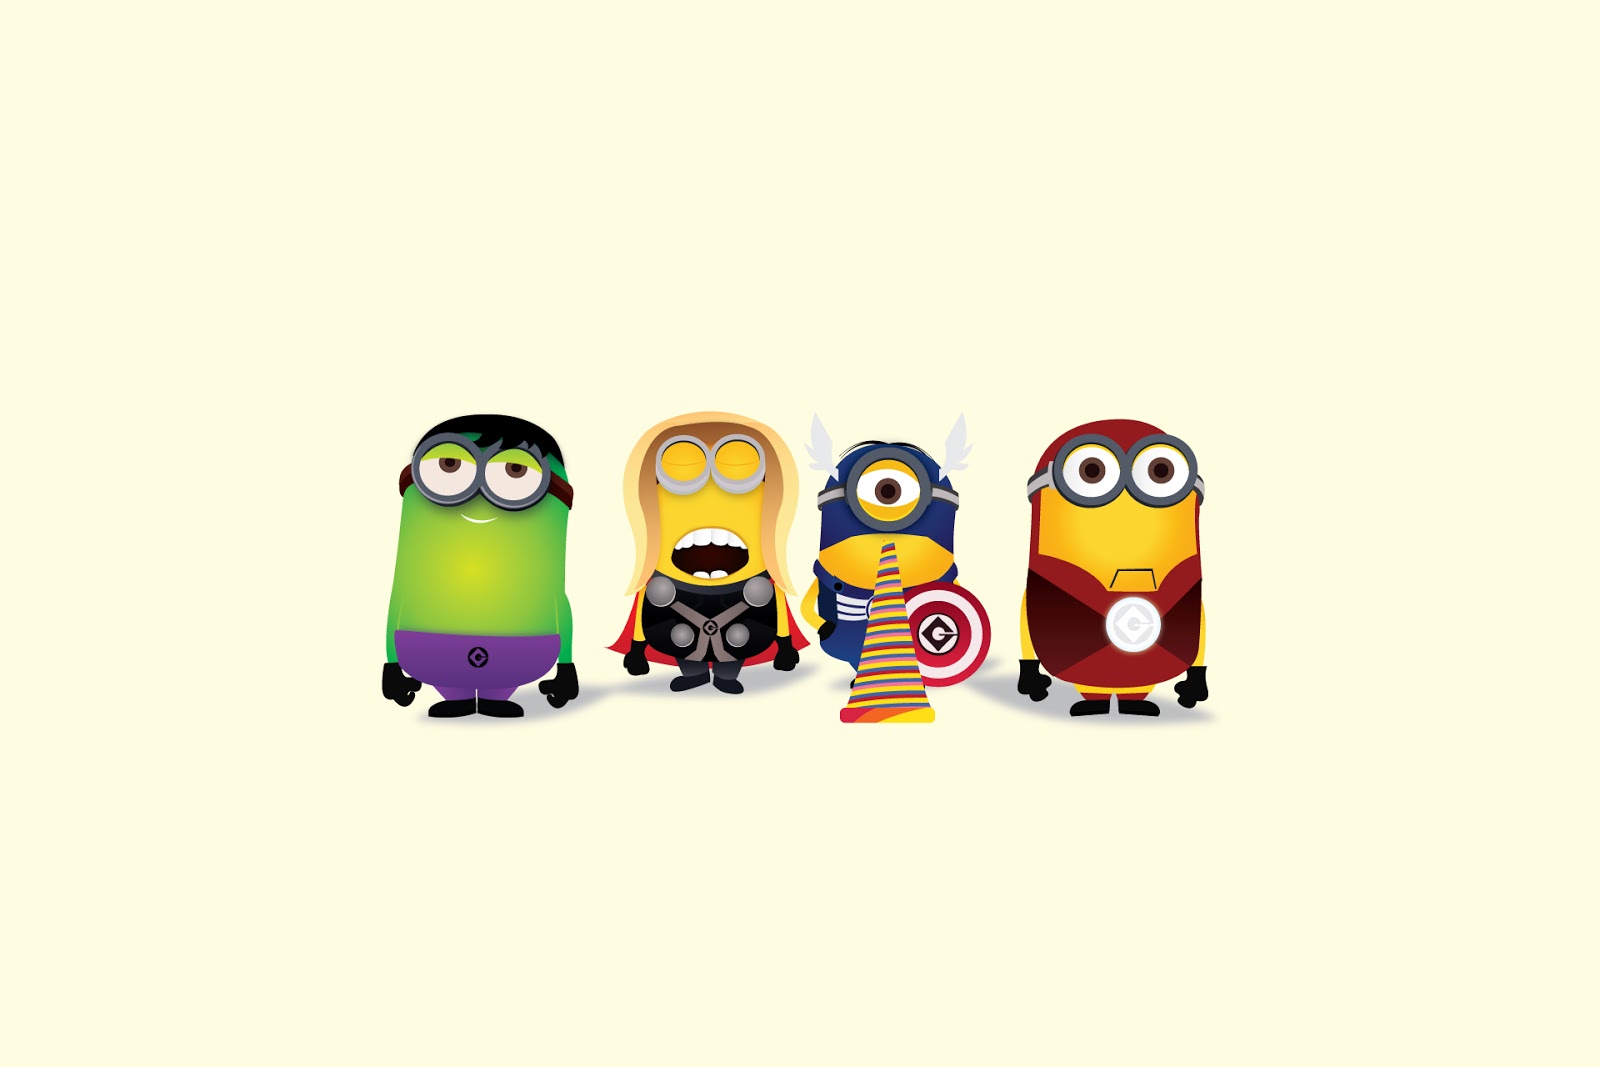 Minion Superhero Wallpaper Images amp Pictures   Becuo